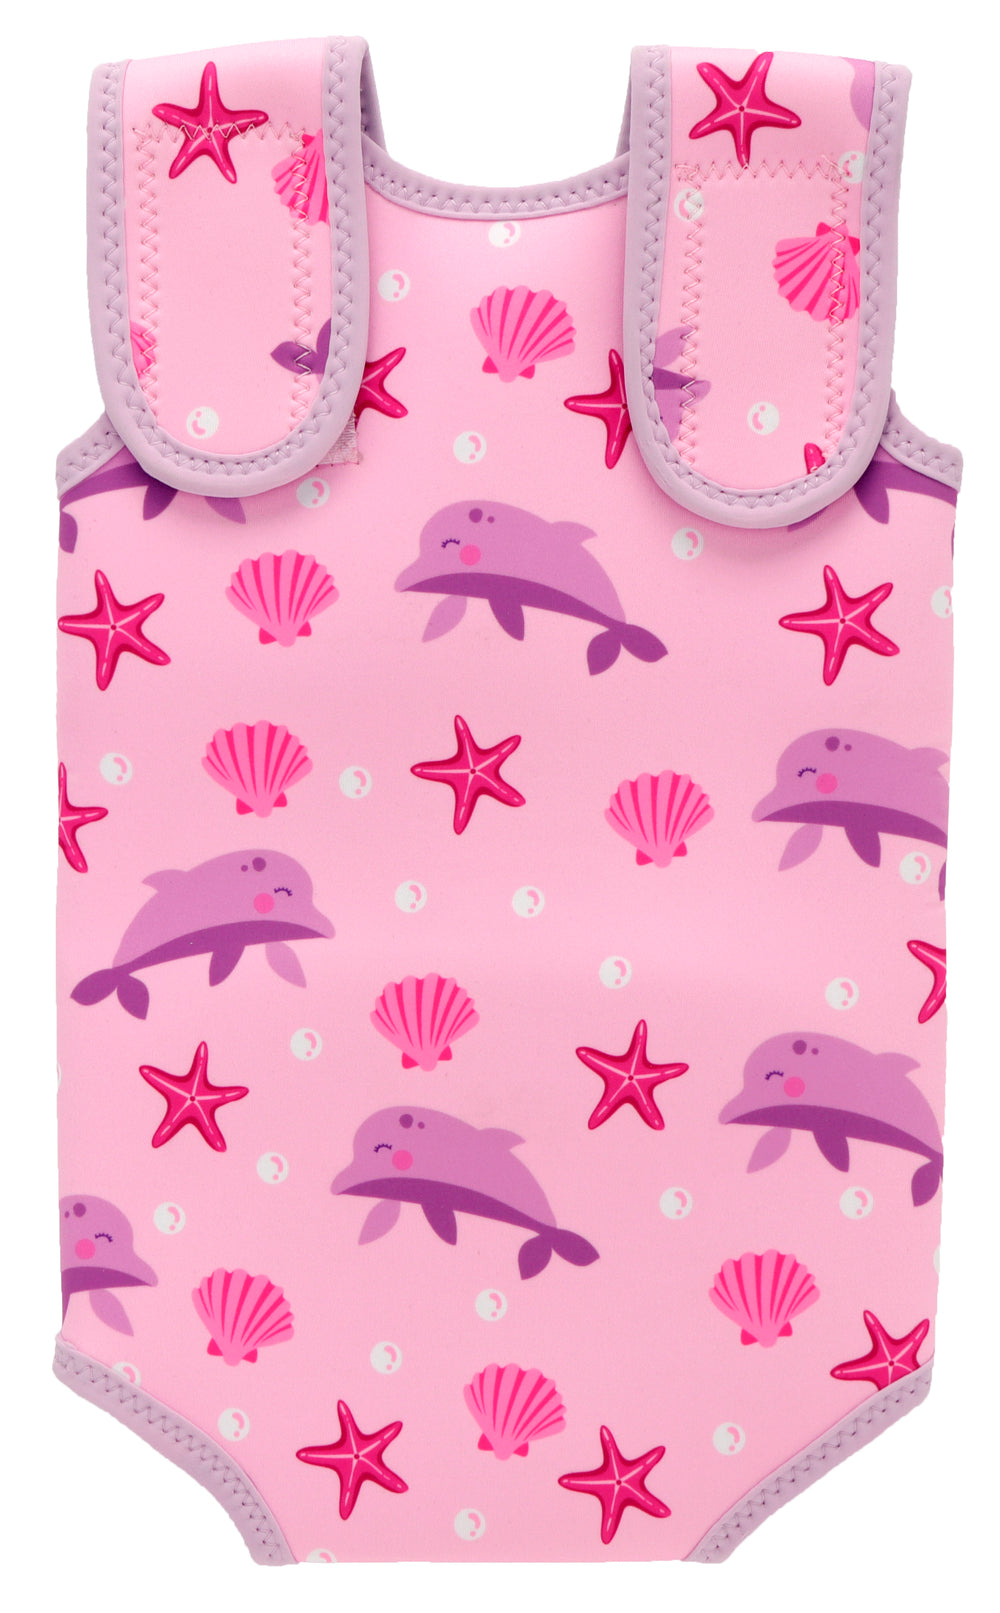 Soft Baby Wrap Wetsuit In Pink Dolphin Prints